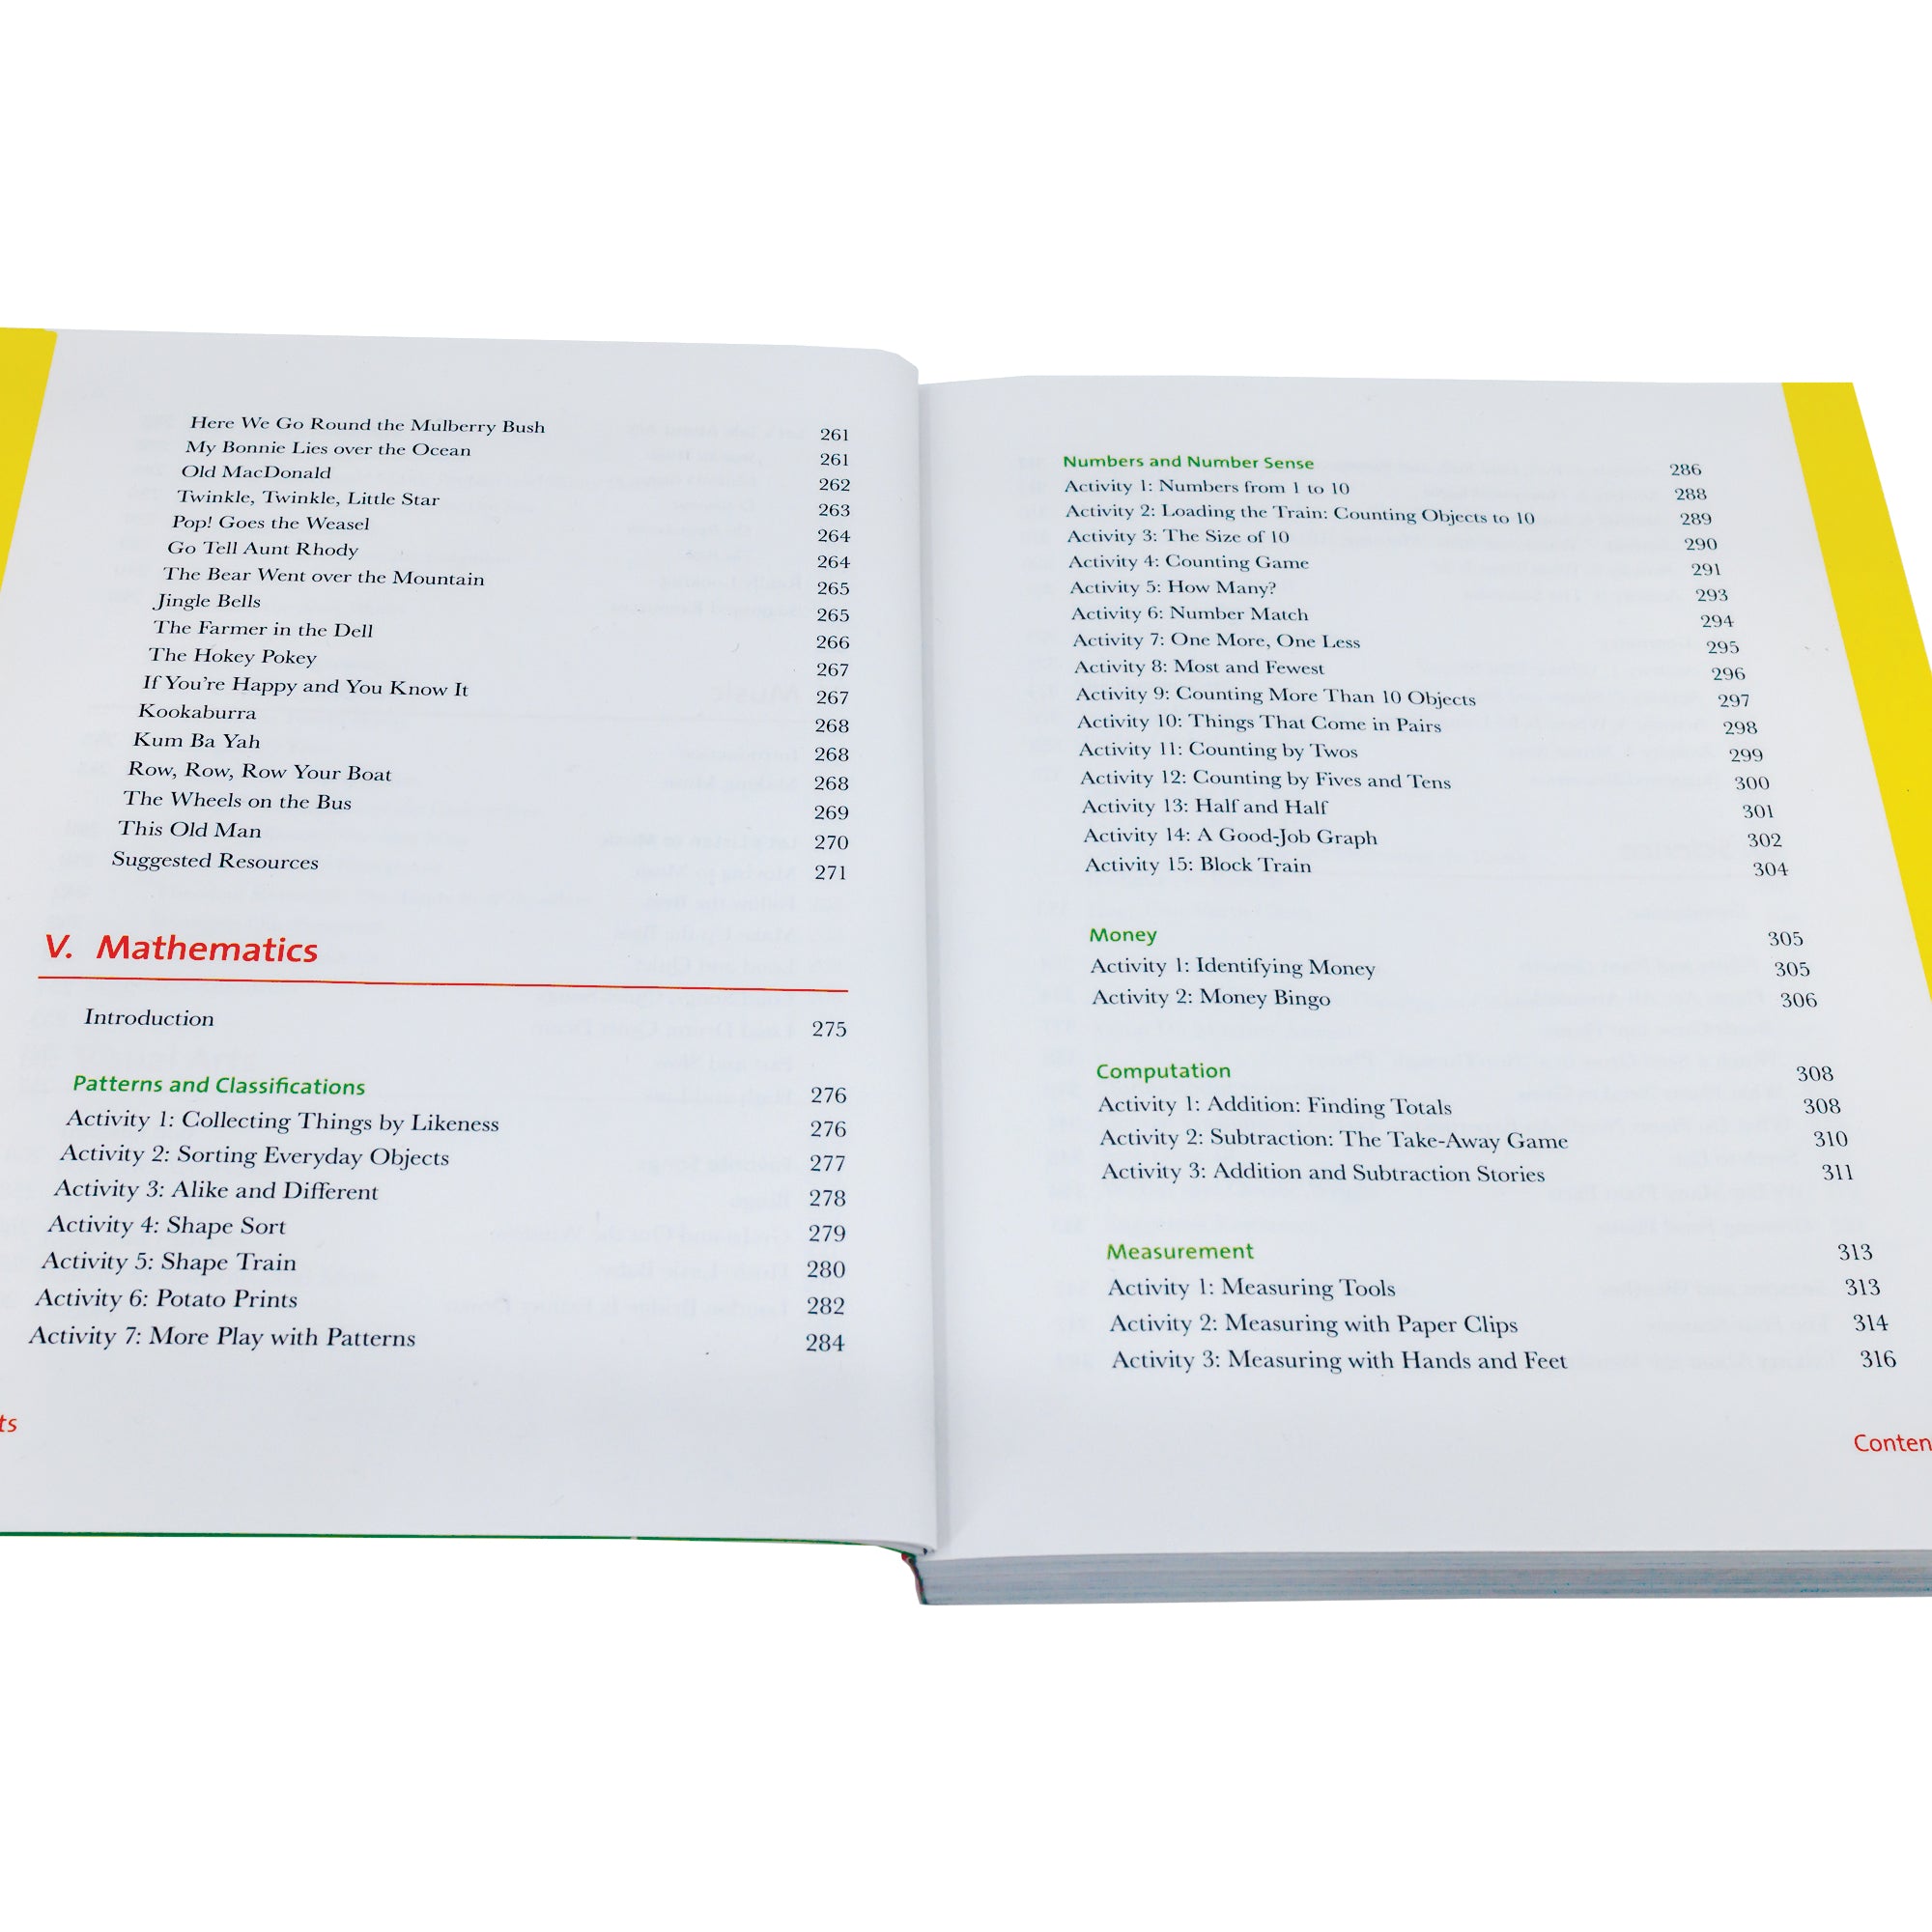 The What Your Kindergartener Needs to Know book open to show the contents on a white page with a yellow boarder along the outsides of the pages. The section titles are in red with green subsection titles and black text below. Section 5 is titled “Mathematics.”